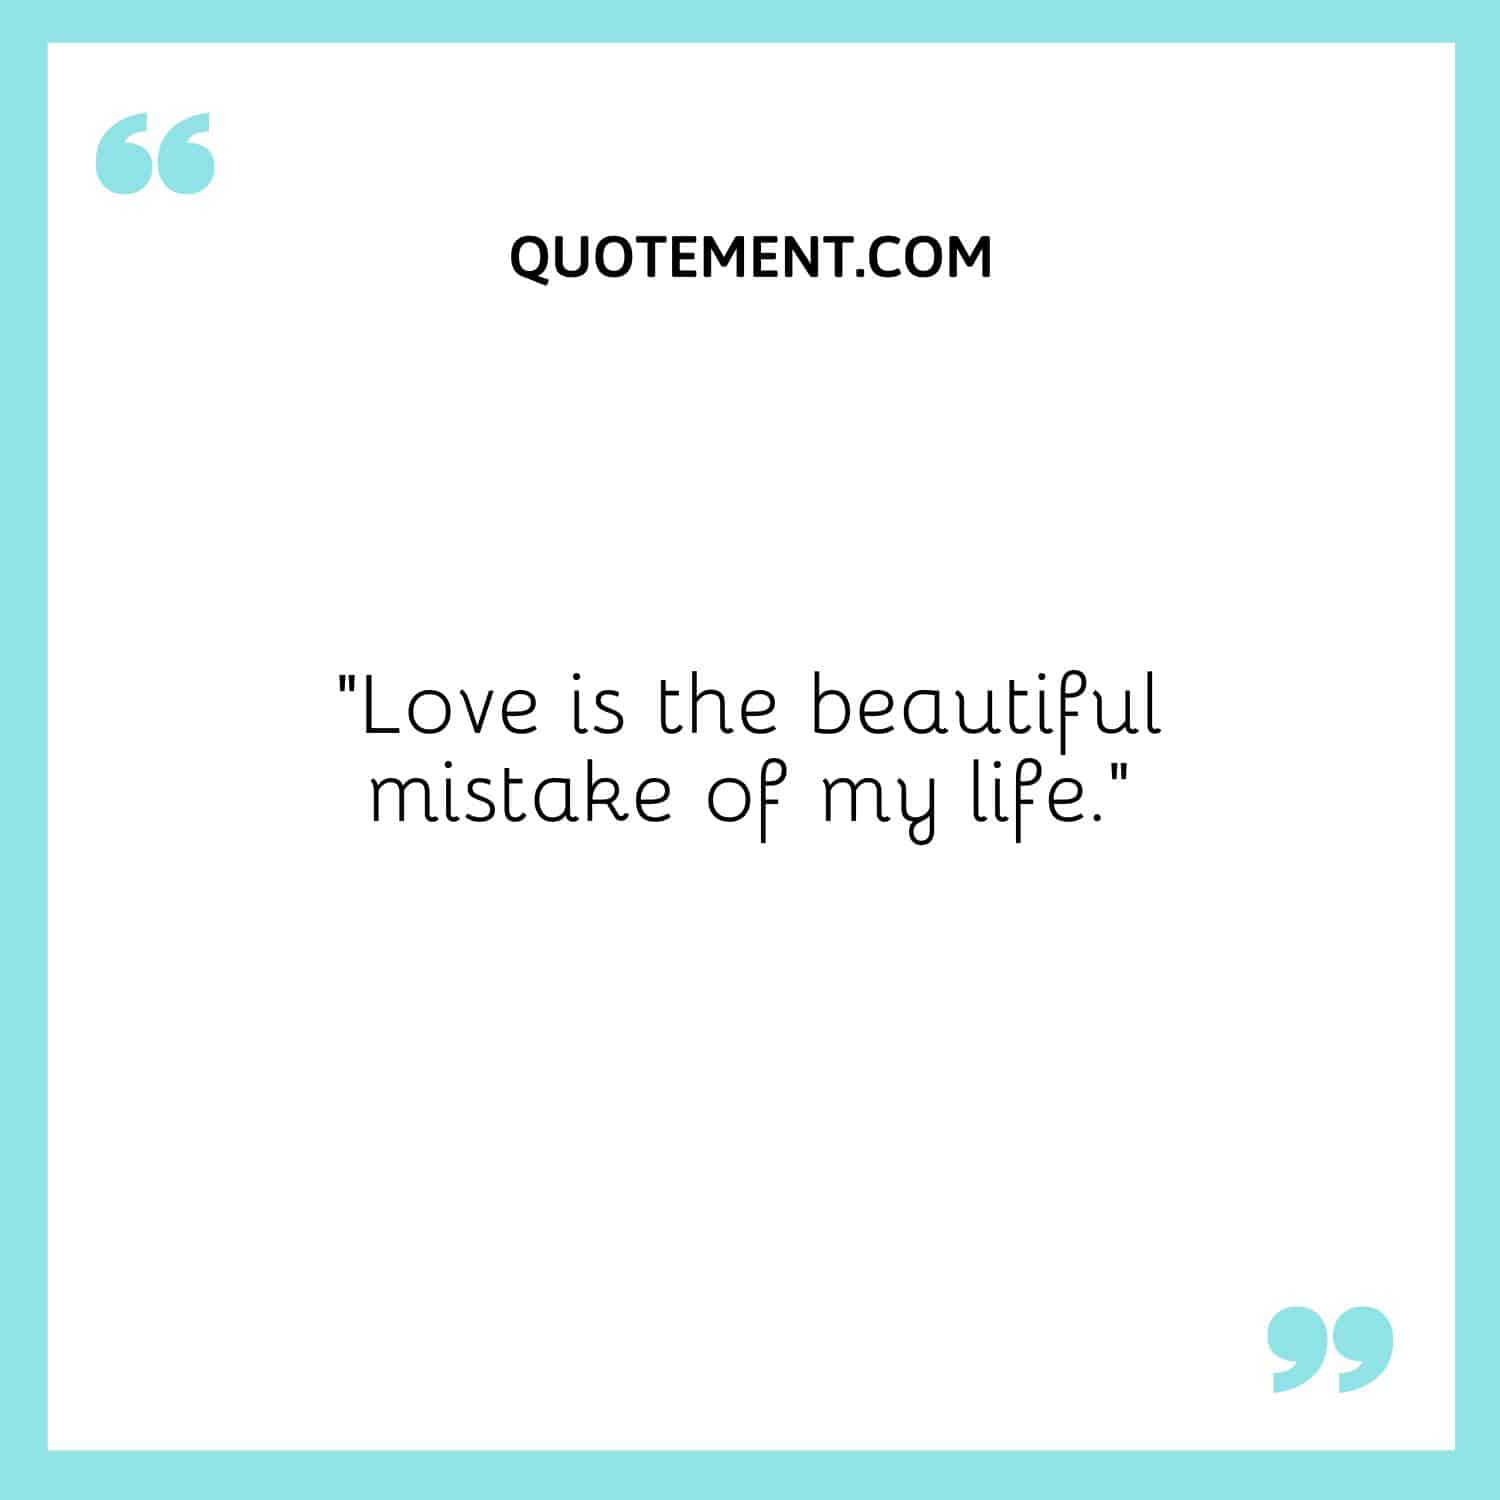 Love is the beautiful mistake of my life